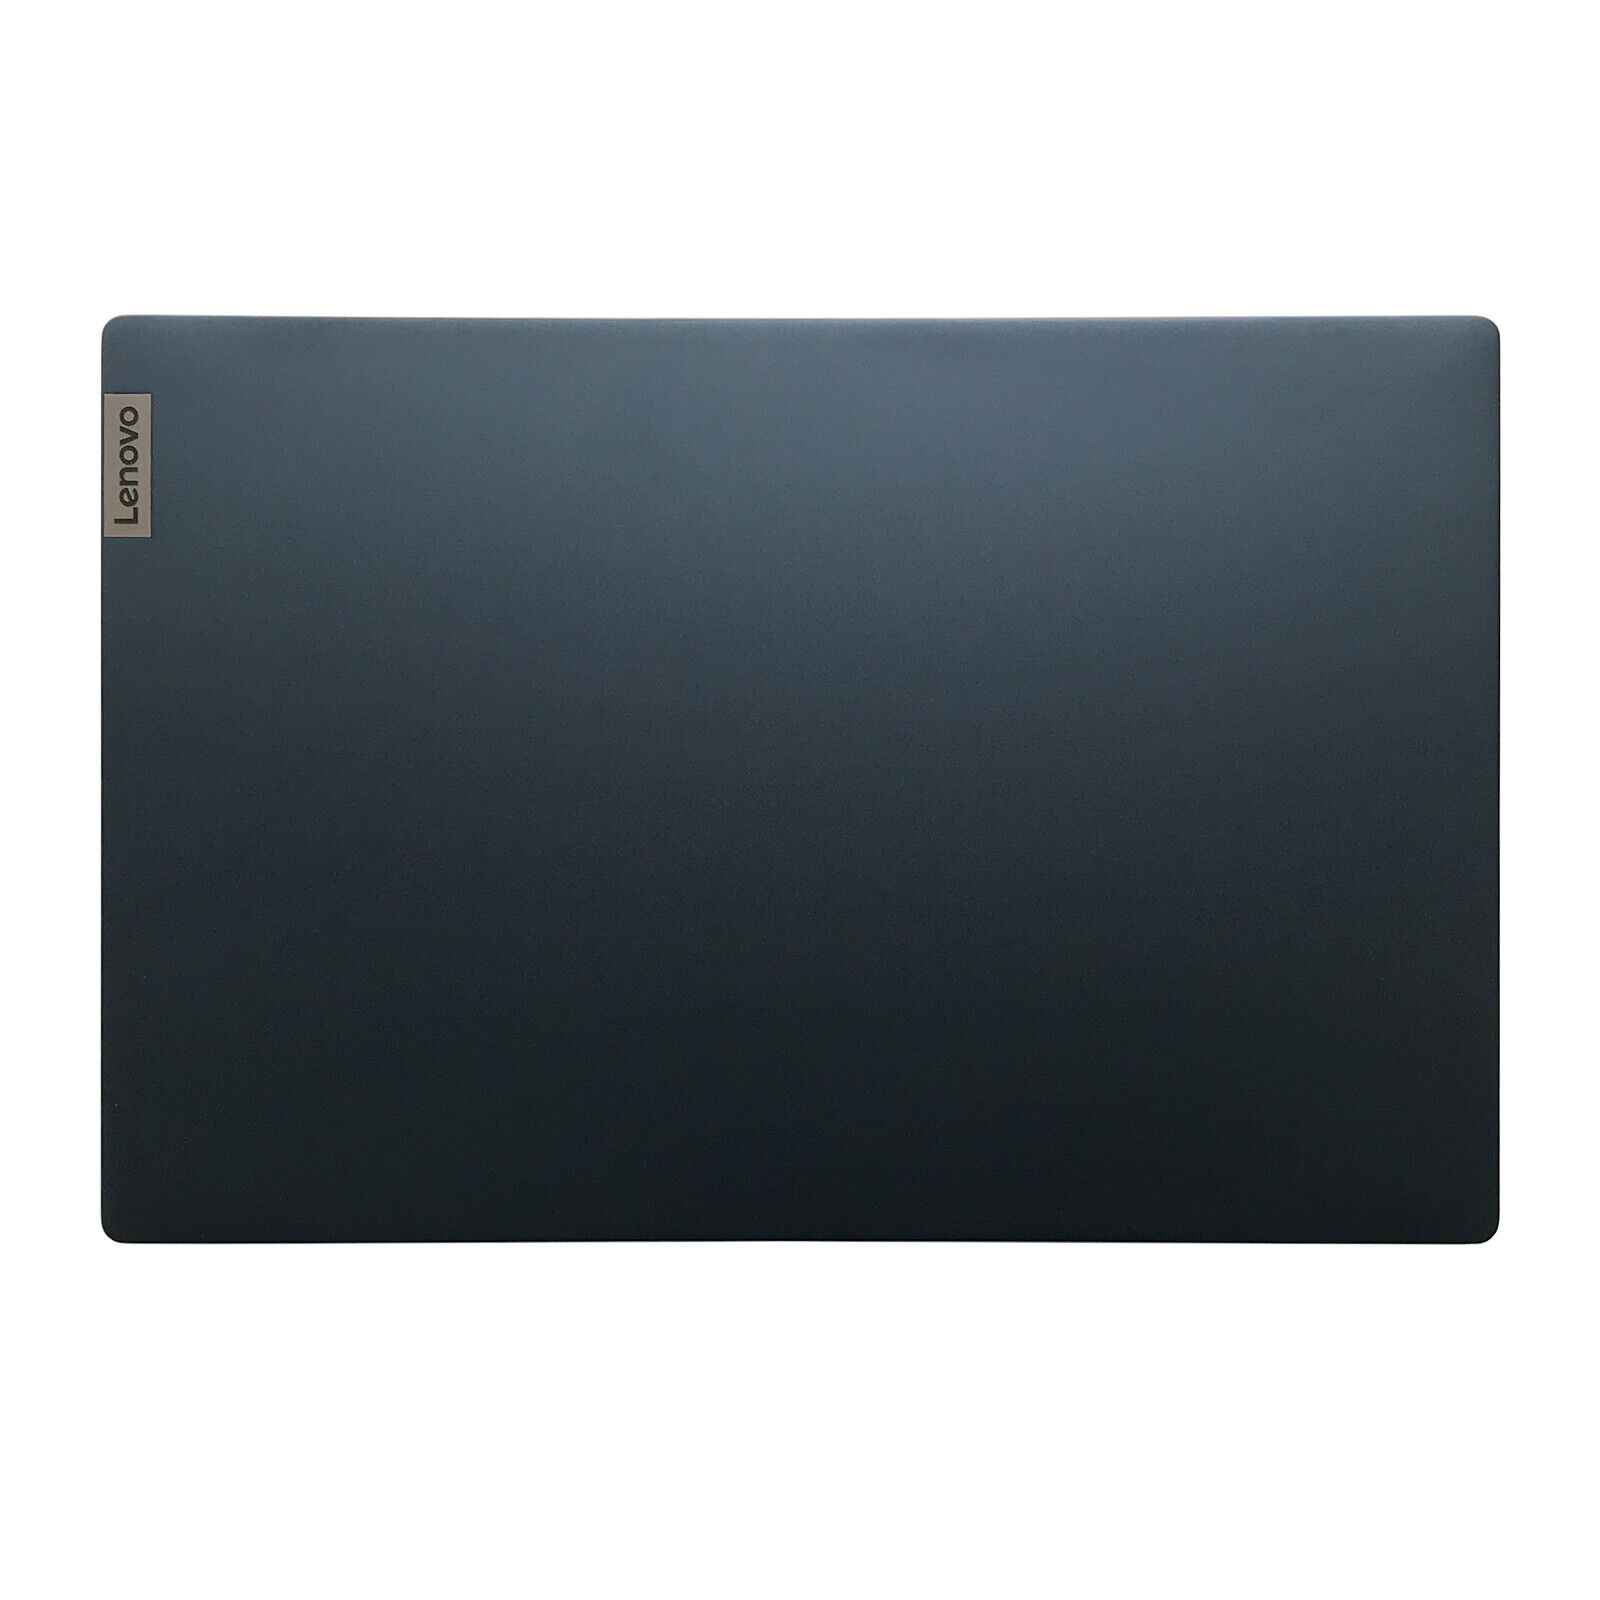 New For Lenovo ideapad 5 15ITL05 15ARE05 15IIL05 15ALC05 LCD Cover/Bezel/Hinge